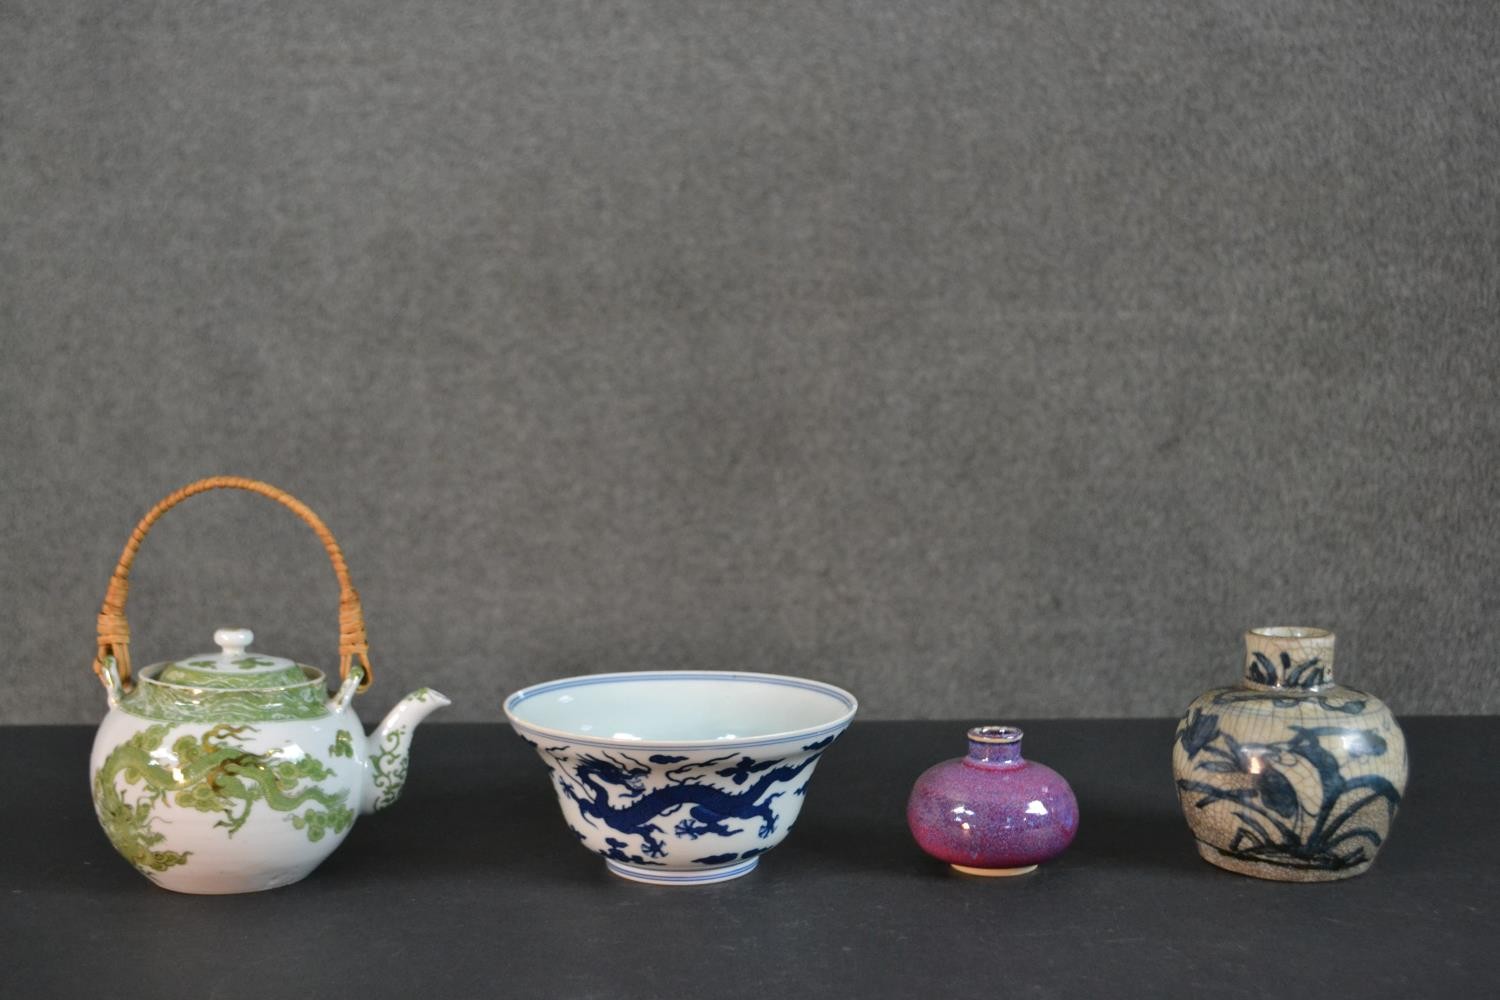 A collection of Chinese ceramics, including a blue and white dragon design porcelain bowl with